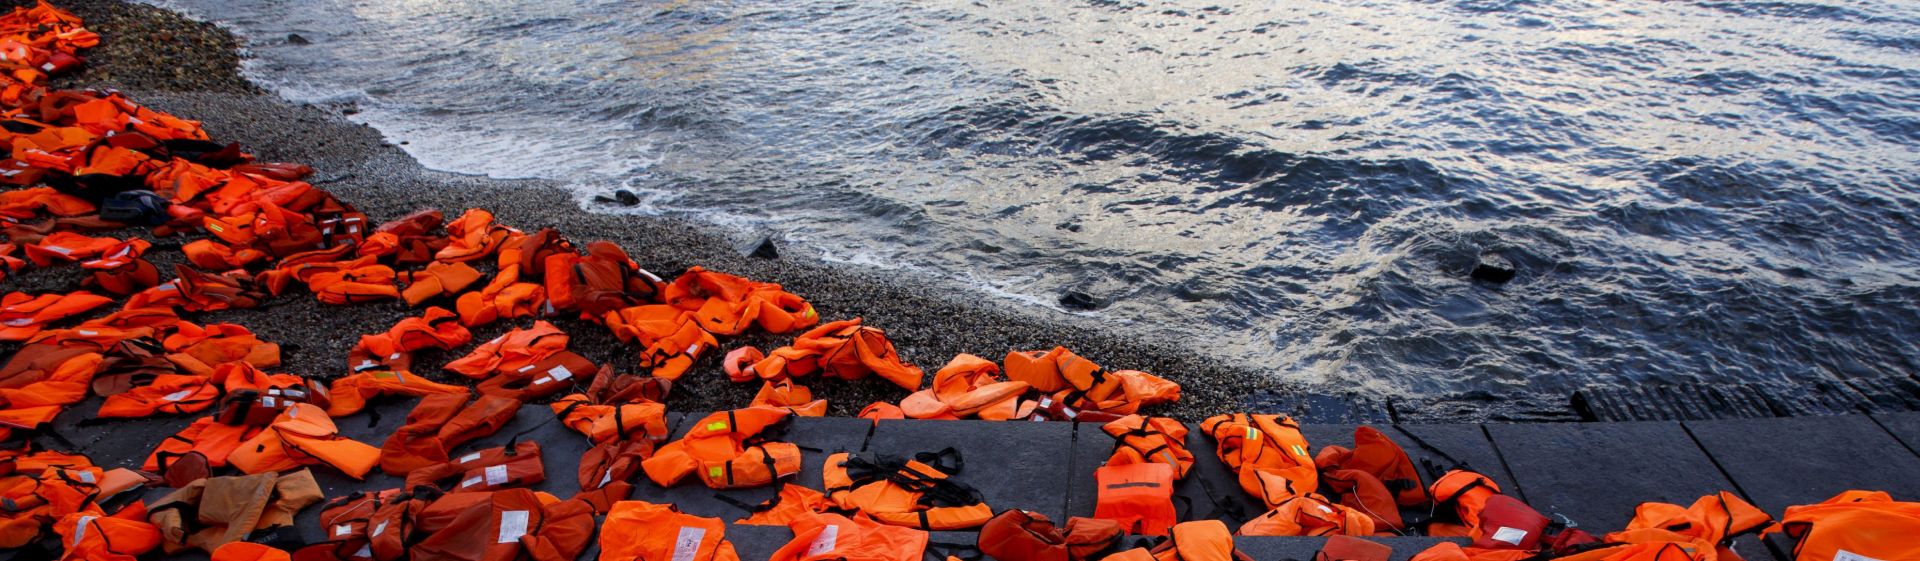 epa05542617 A view of some of the hundreds of refugee life jackets collected from the beaches of Chios, Greece, on the edge of the East River, to call attention to the refugee crisis in Brooklyn, New York, USA, 16 September 2016. The life jackets which were gathered by the Oxfam organization ahead of next week's United Nations Summit for Refugees and Migrants.  EPA/JUSTIN LANE